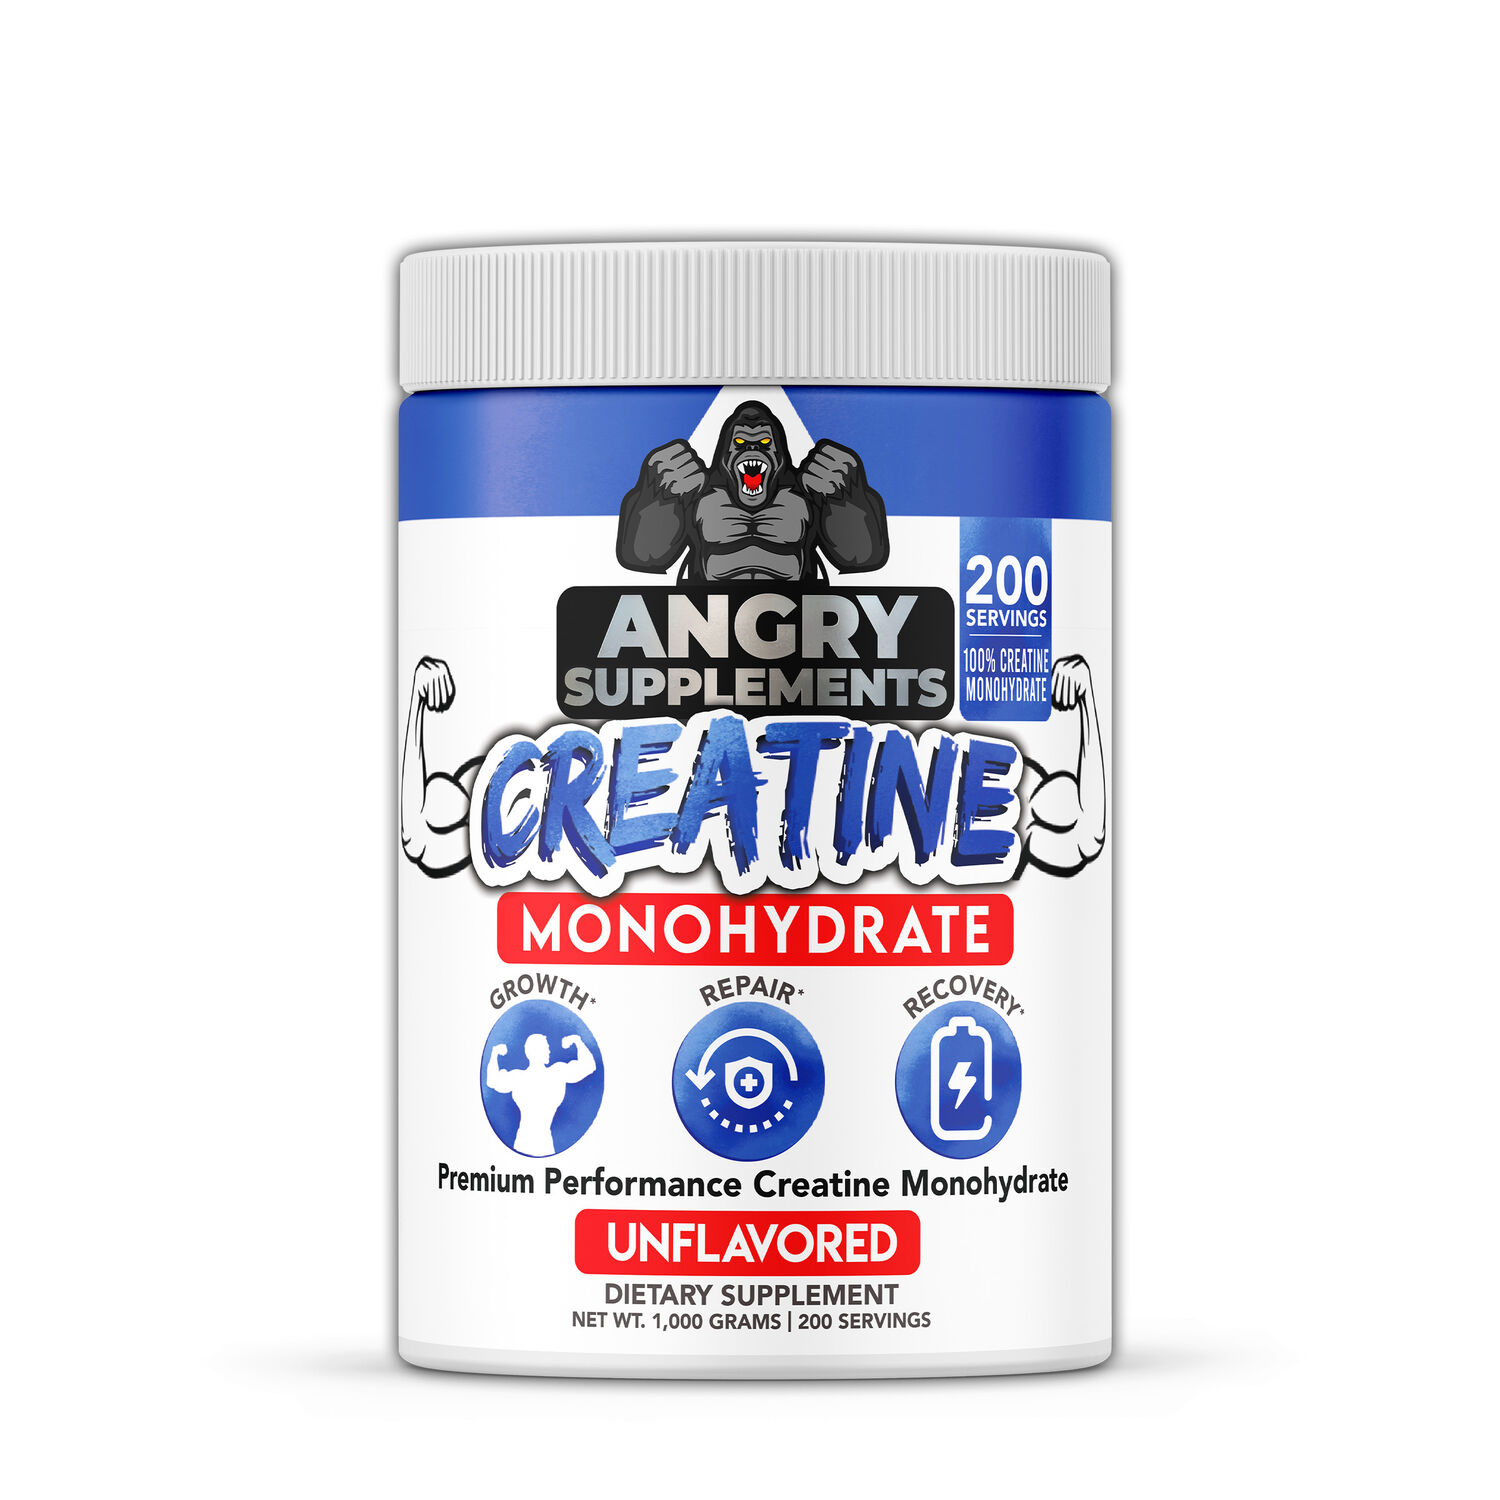 Angry Supplements Creatine Monohydrate - Unflavored (200 Servings)